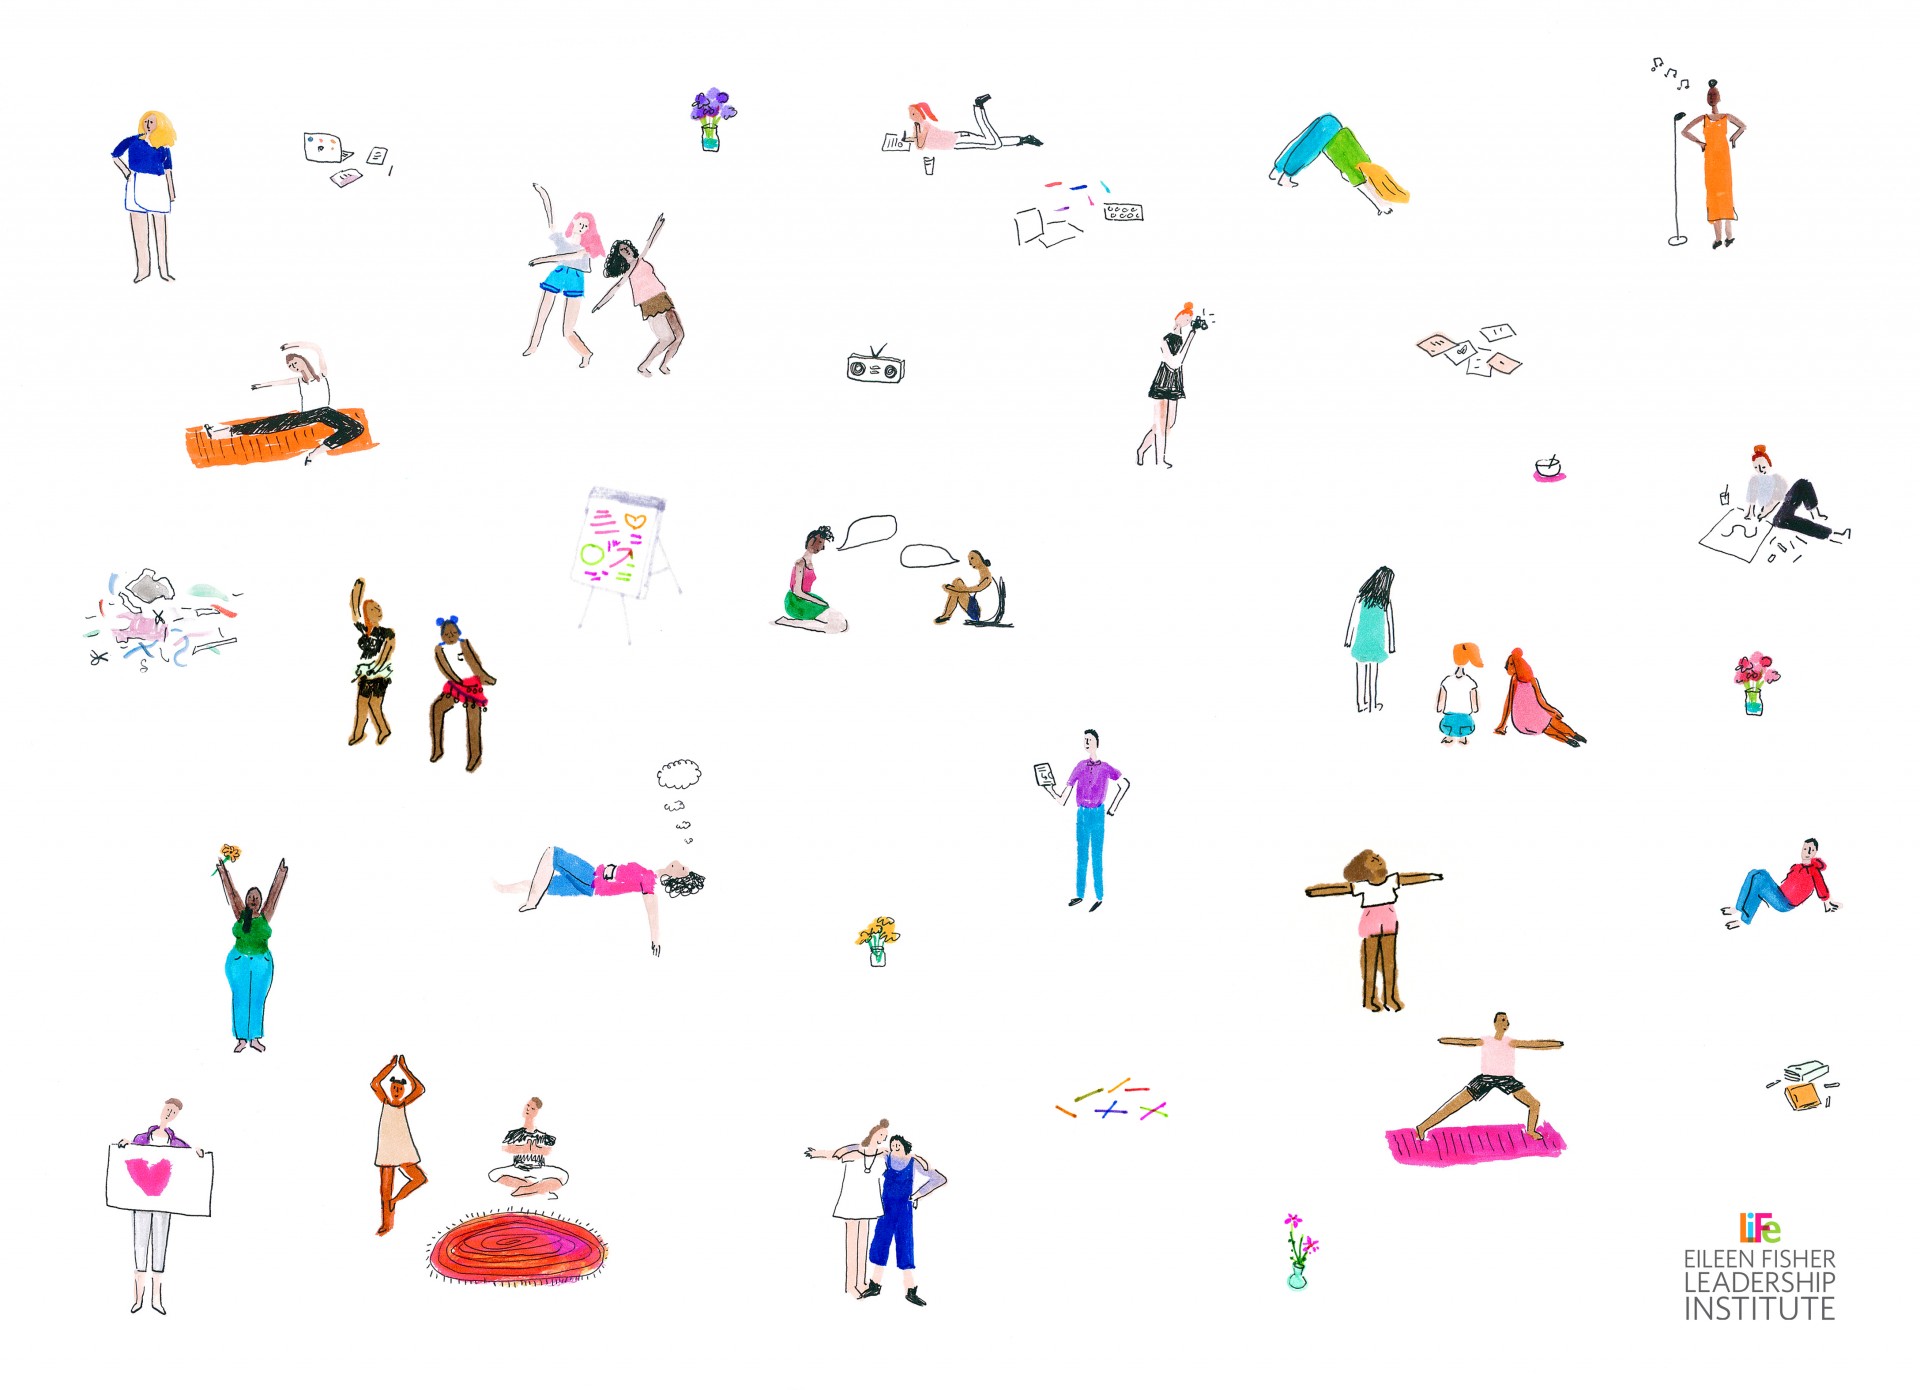 A scattered design of colorful figures in various positions against white background. Positions include yoga poses, dancing, singing and standing. 